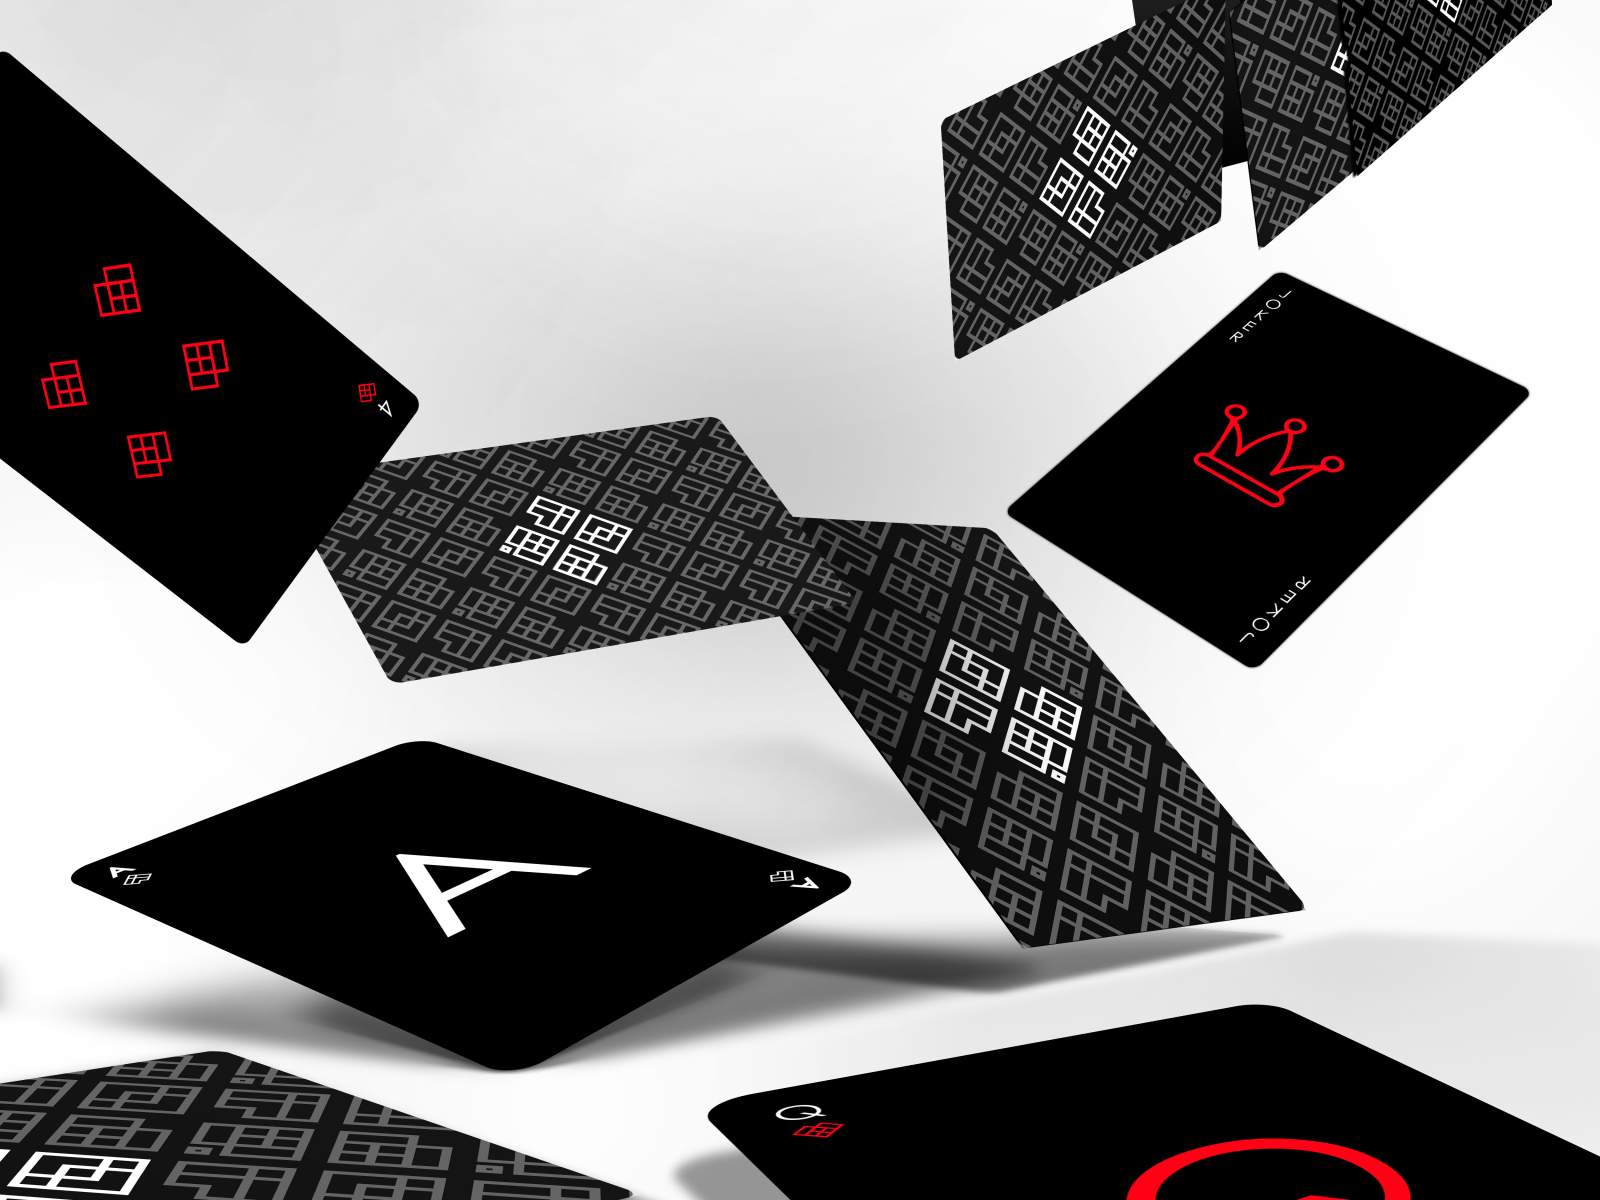 Download HABI Playing Cards Mockup Design by JM Suba on Dribbble